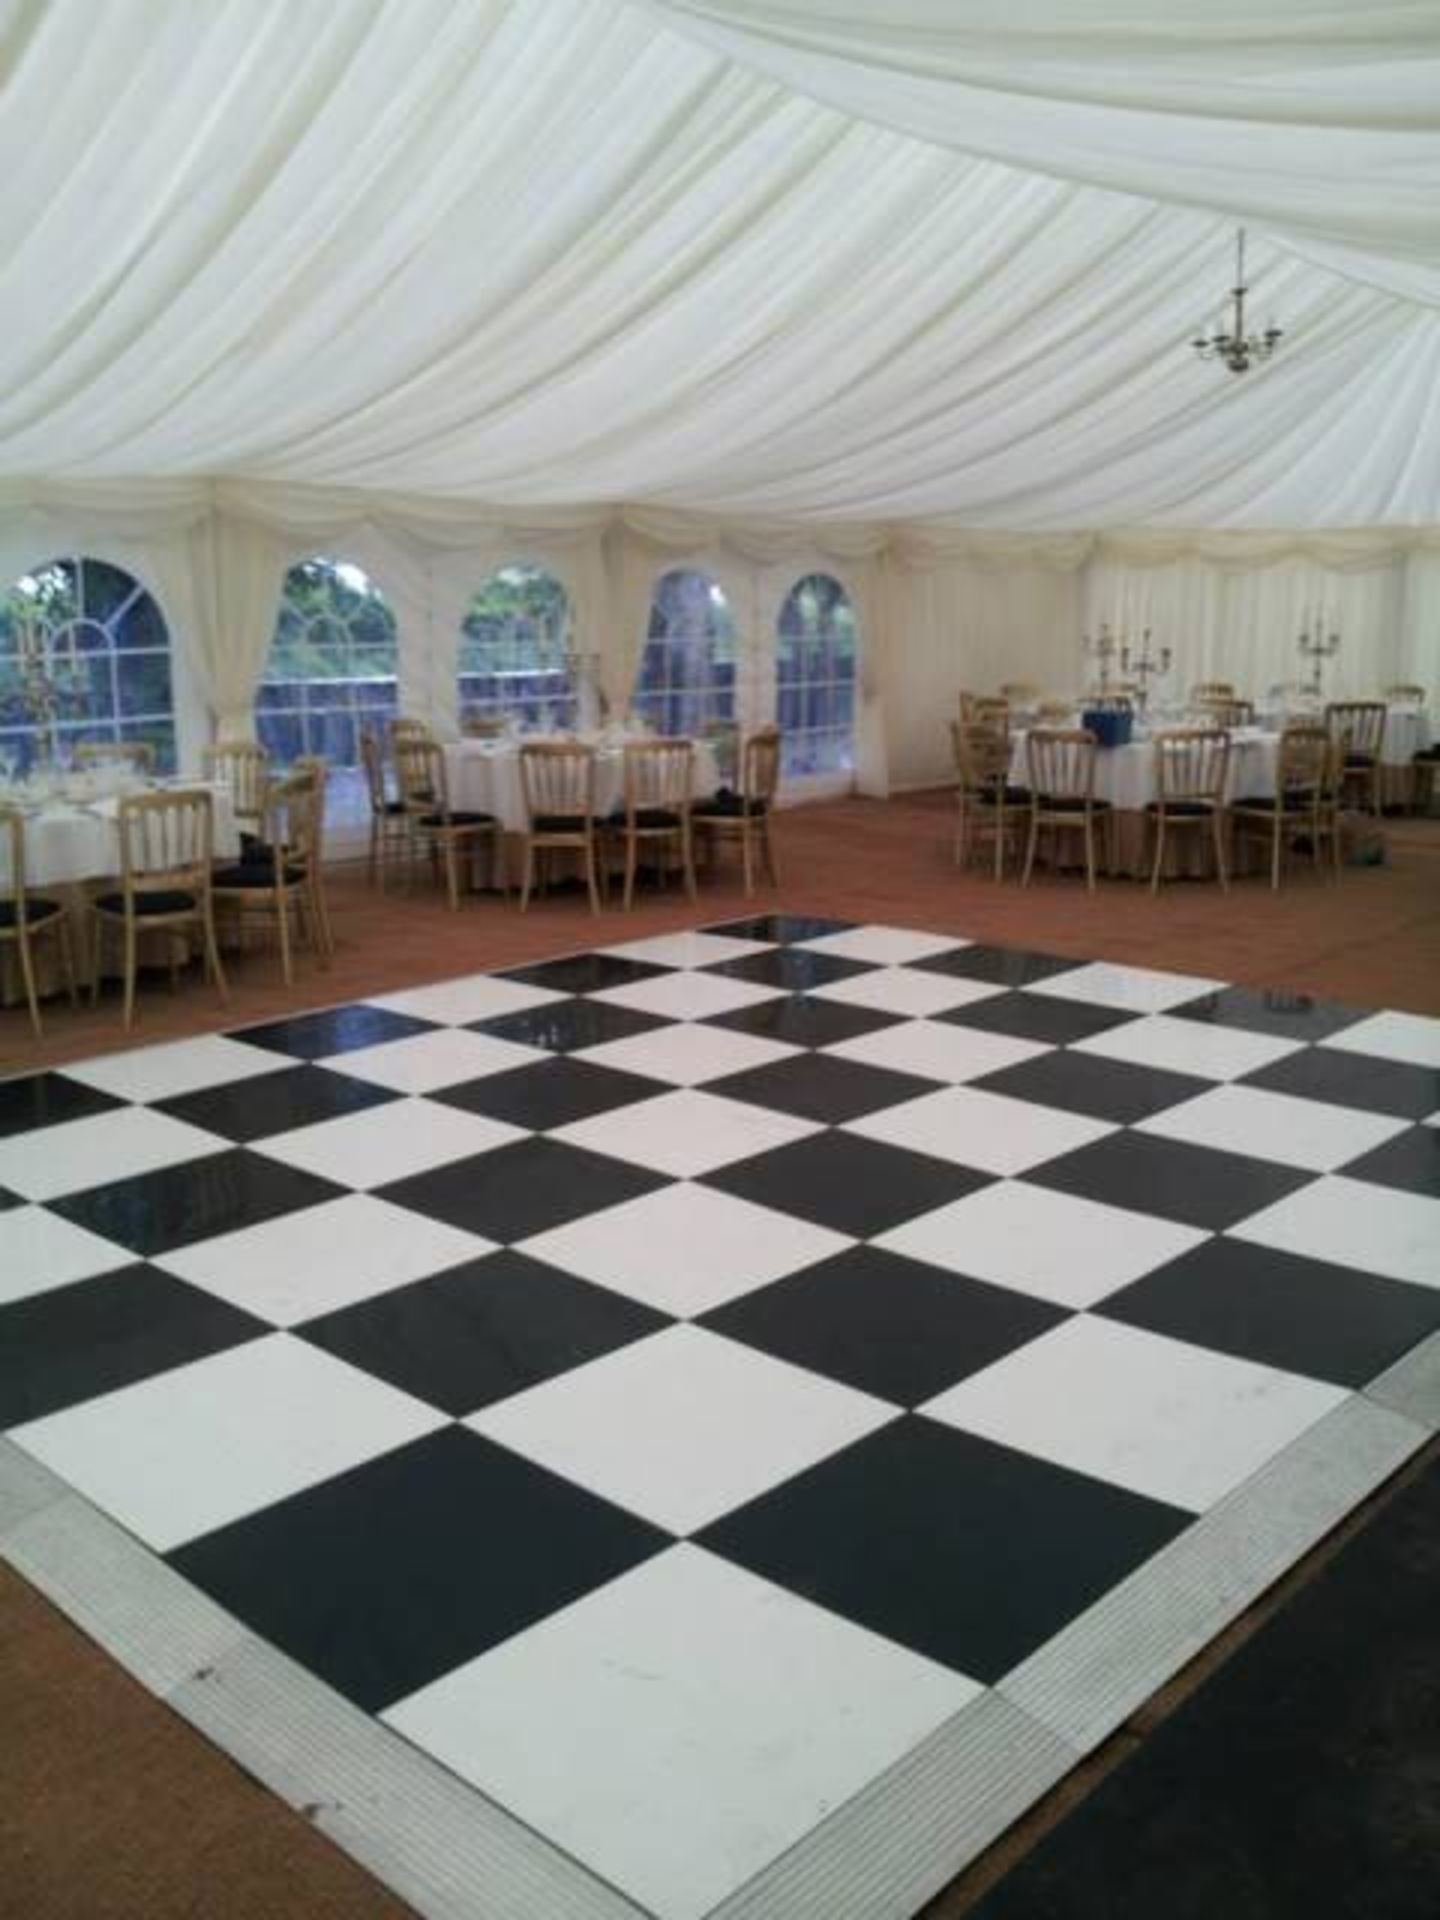 Grumpy Joe’s Acrylic 16ft x 16ft Black and White Chequered Dance Floor with Carry Trolley - Image 3 of 3